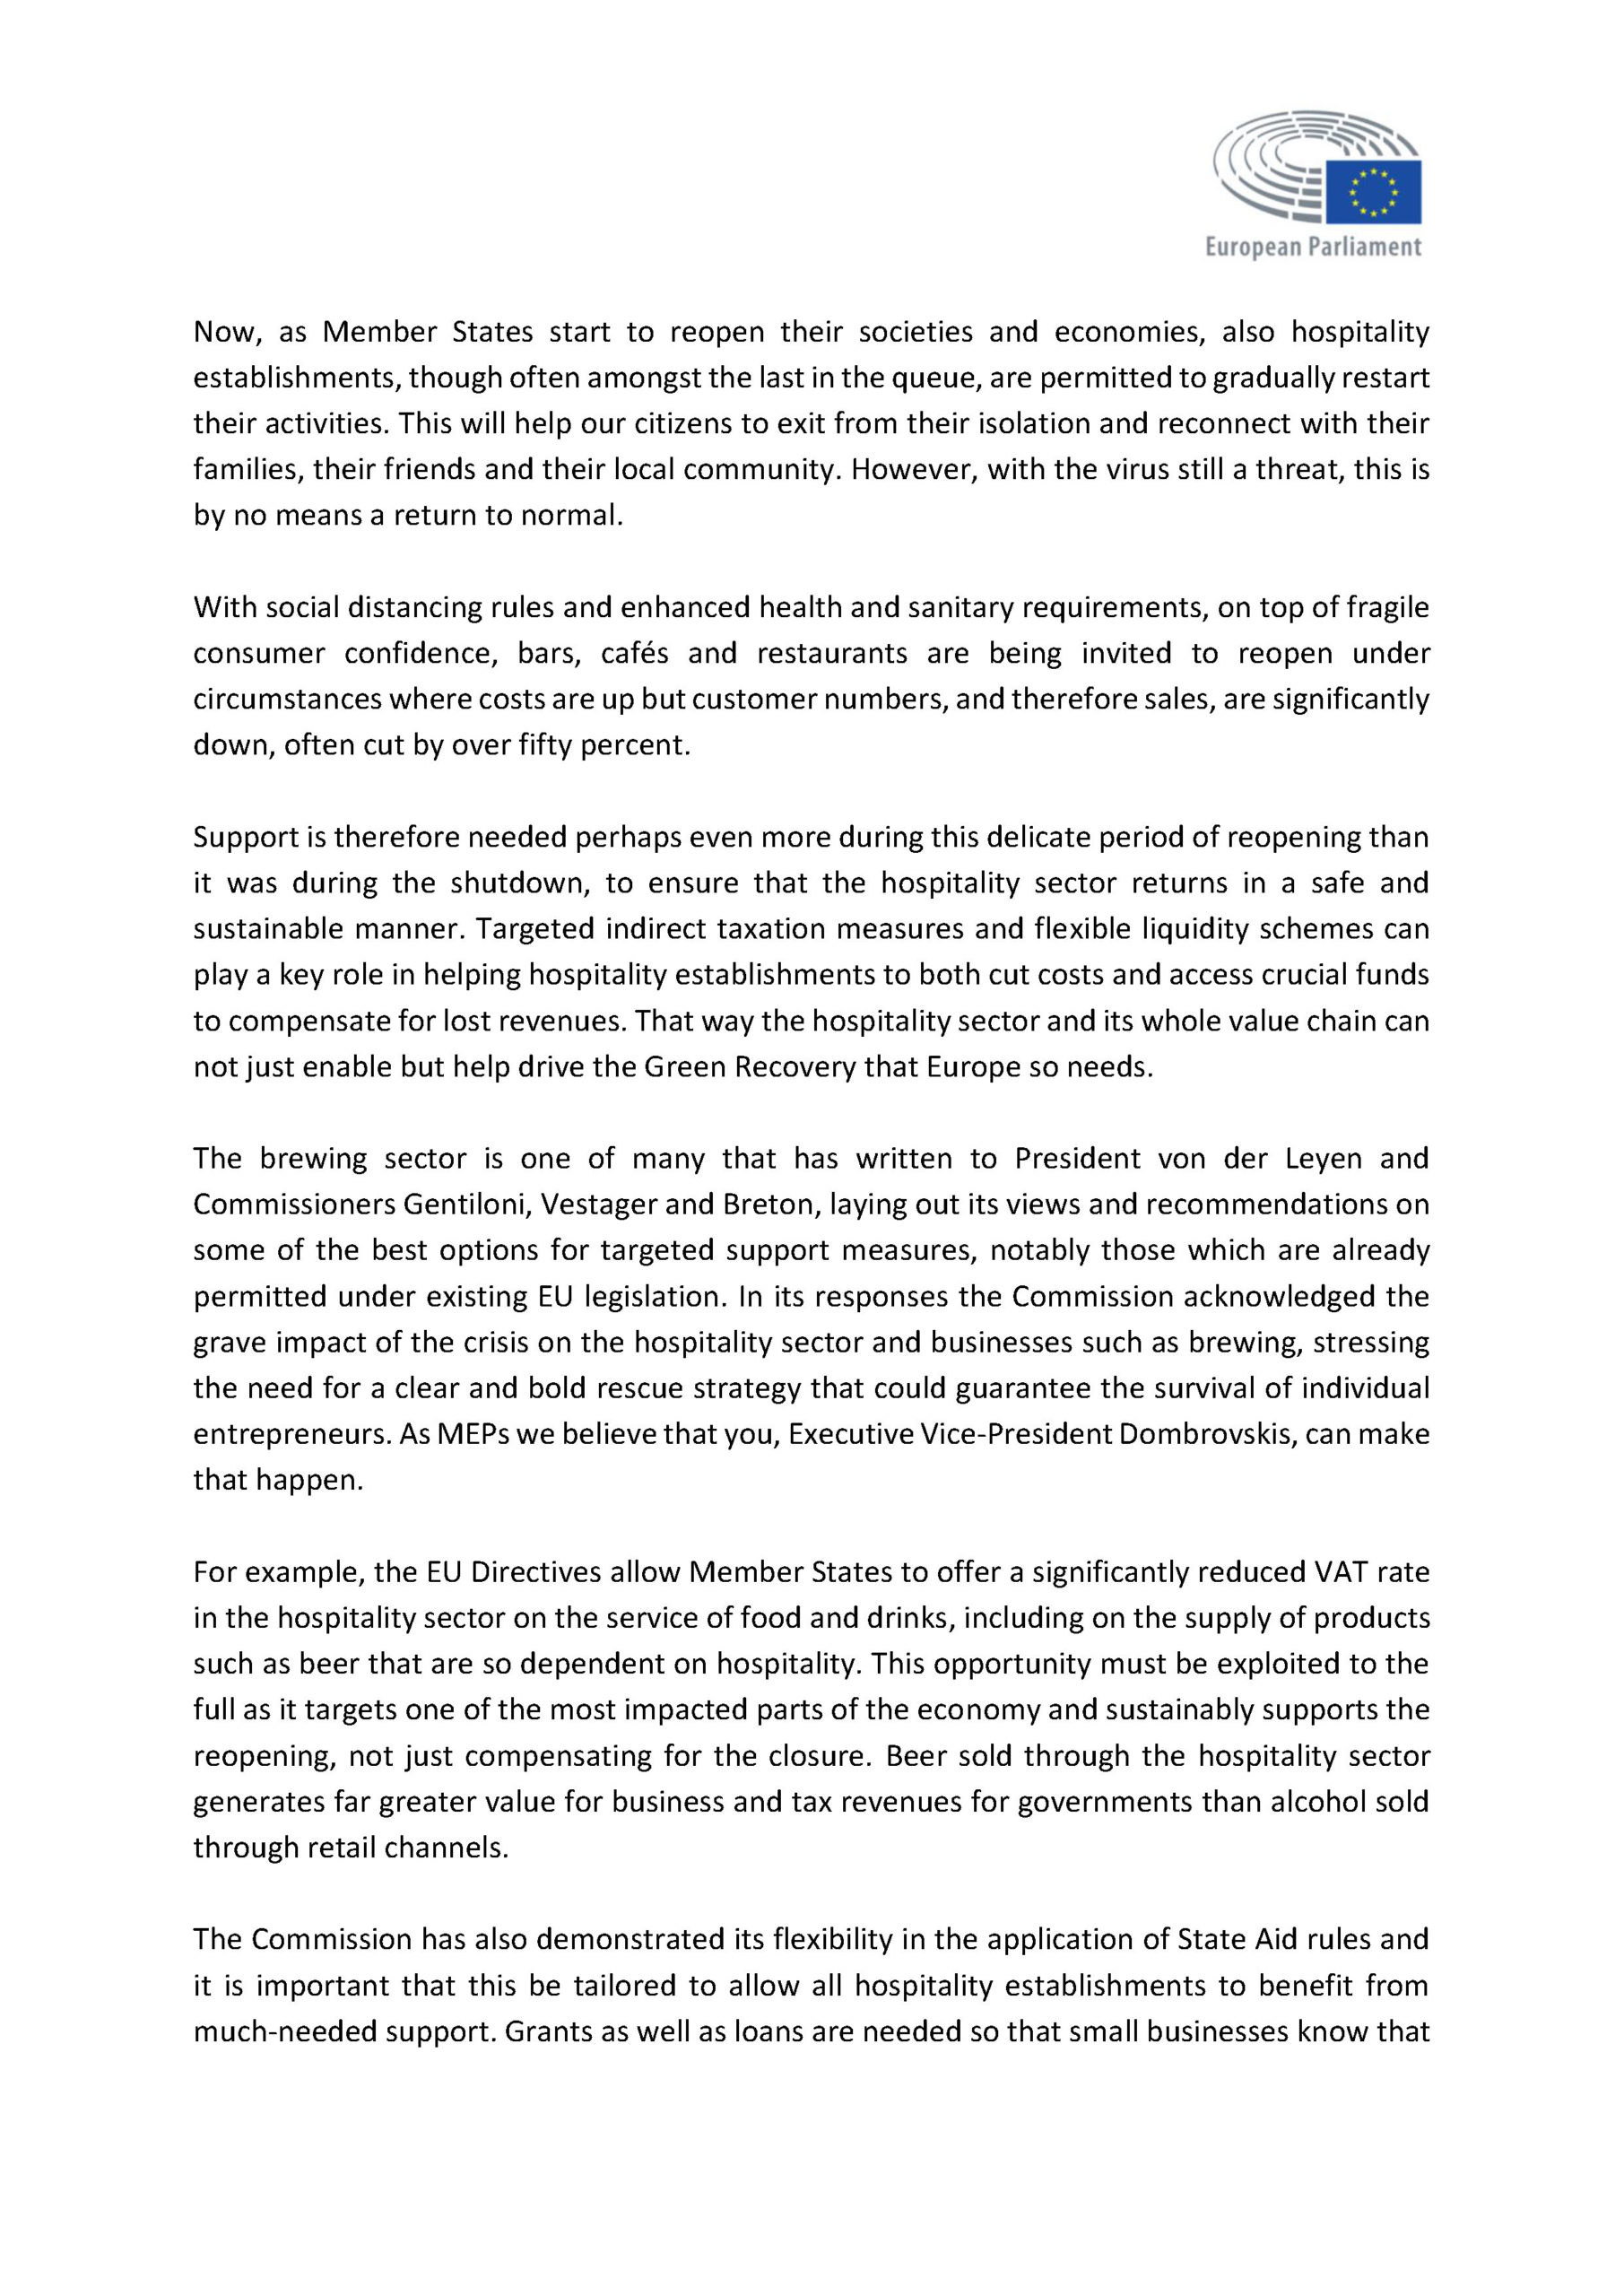 Letter on supporting the recovery of Europe's hospitality sector - page 2